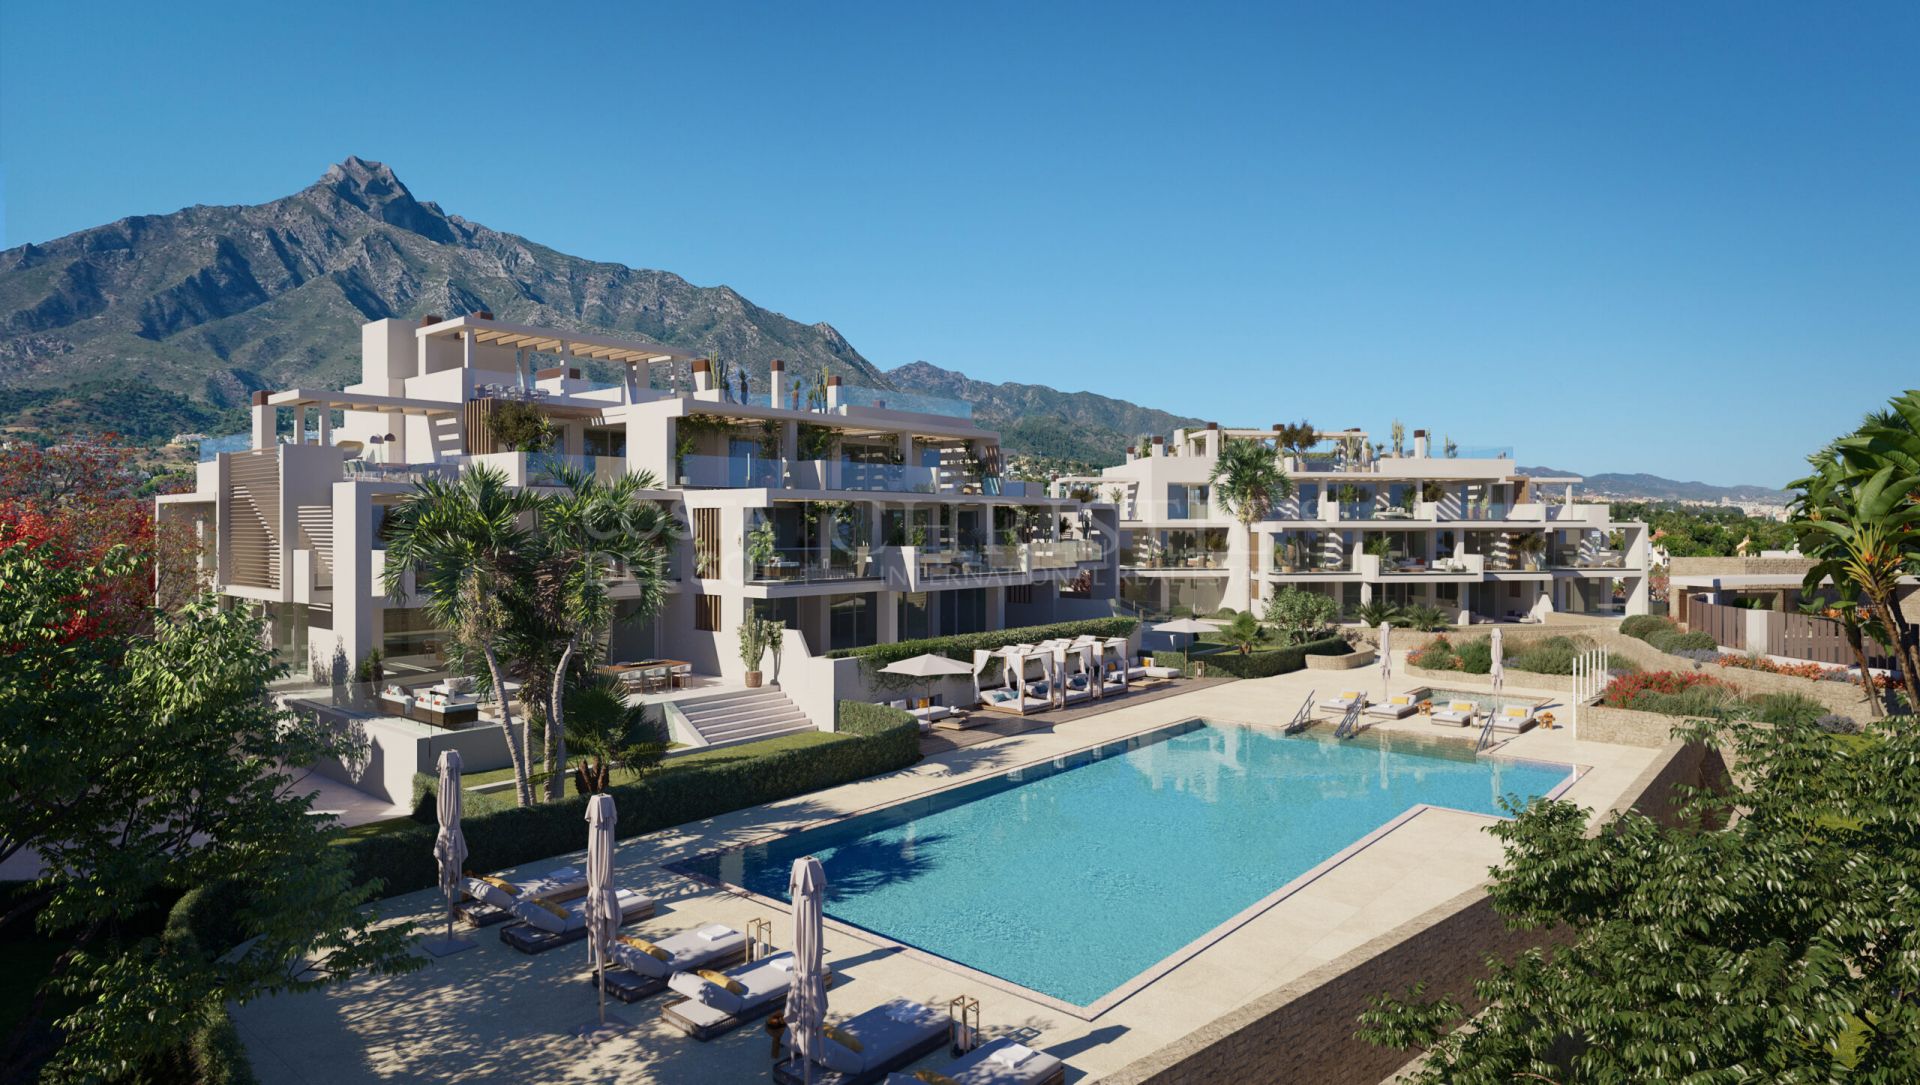 Amazing appartments in Marbella Golden Mile, Señorio de Marbella, Marbella Golden Mile - ​Exclusive complex of new apartments and penthouses on the Golden Mile | Christie’s International Real Estate